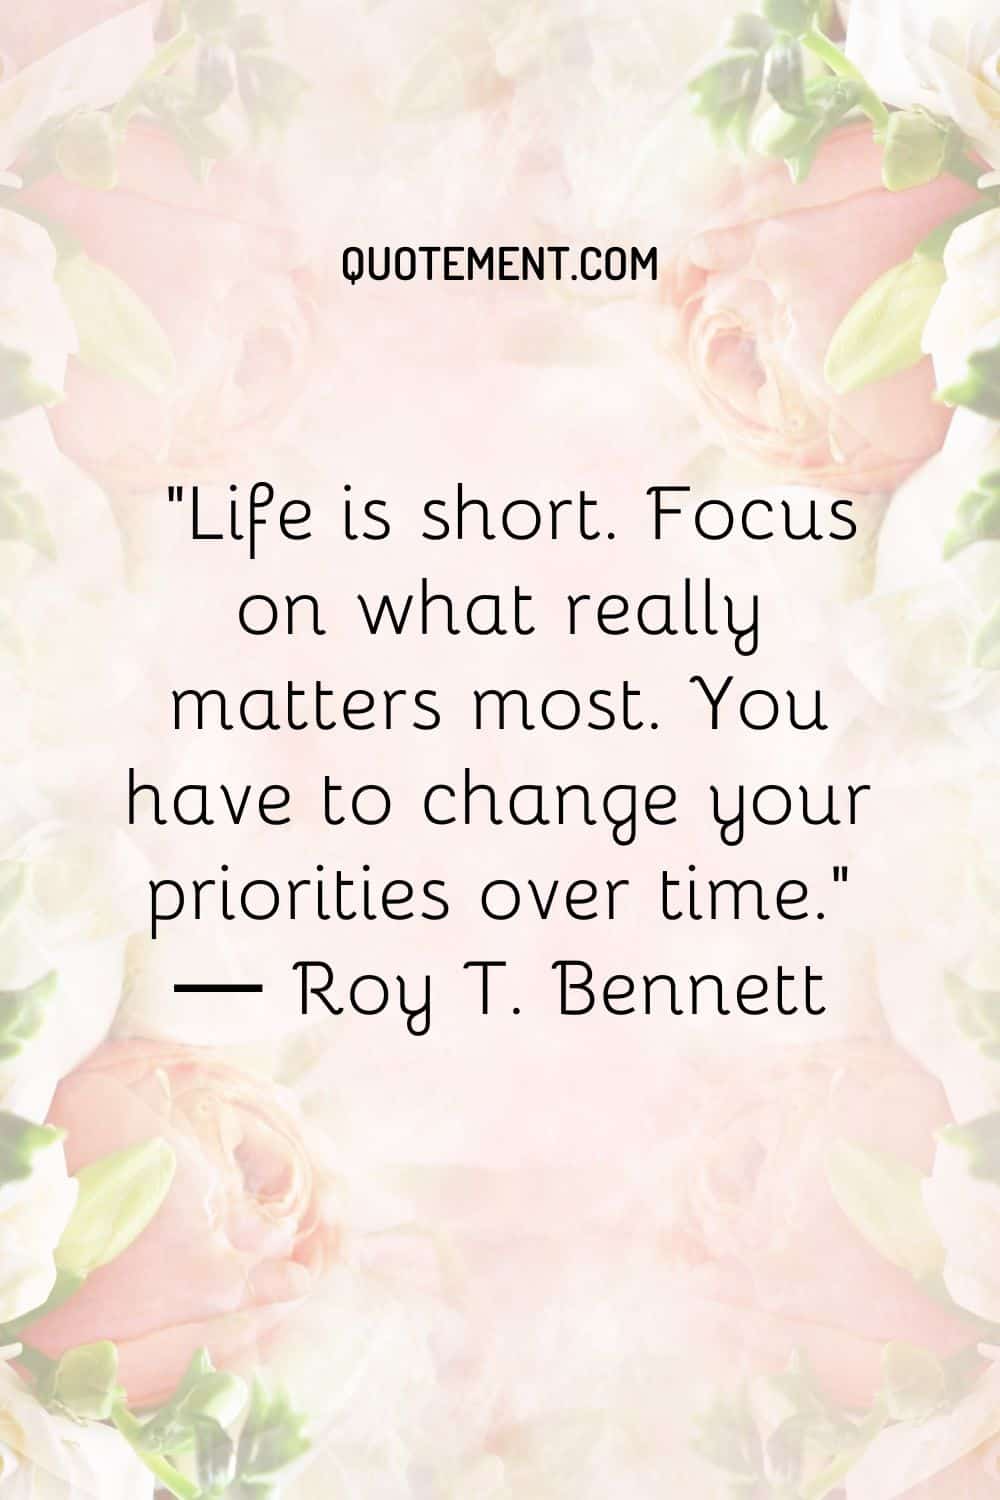 Life is short. Focus on what really matters most. You have to change your priorities over time